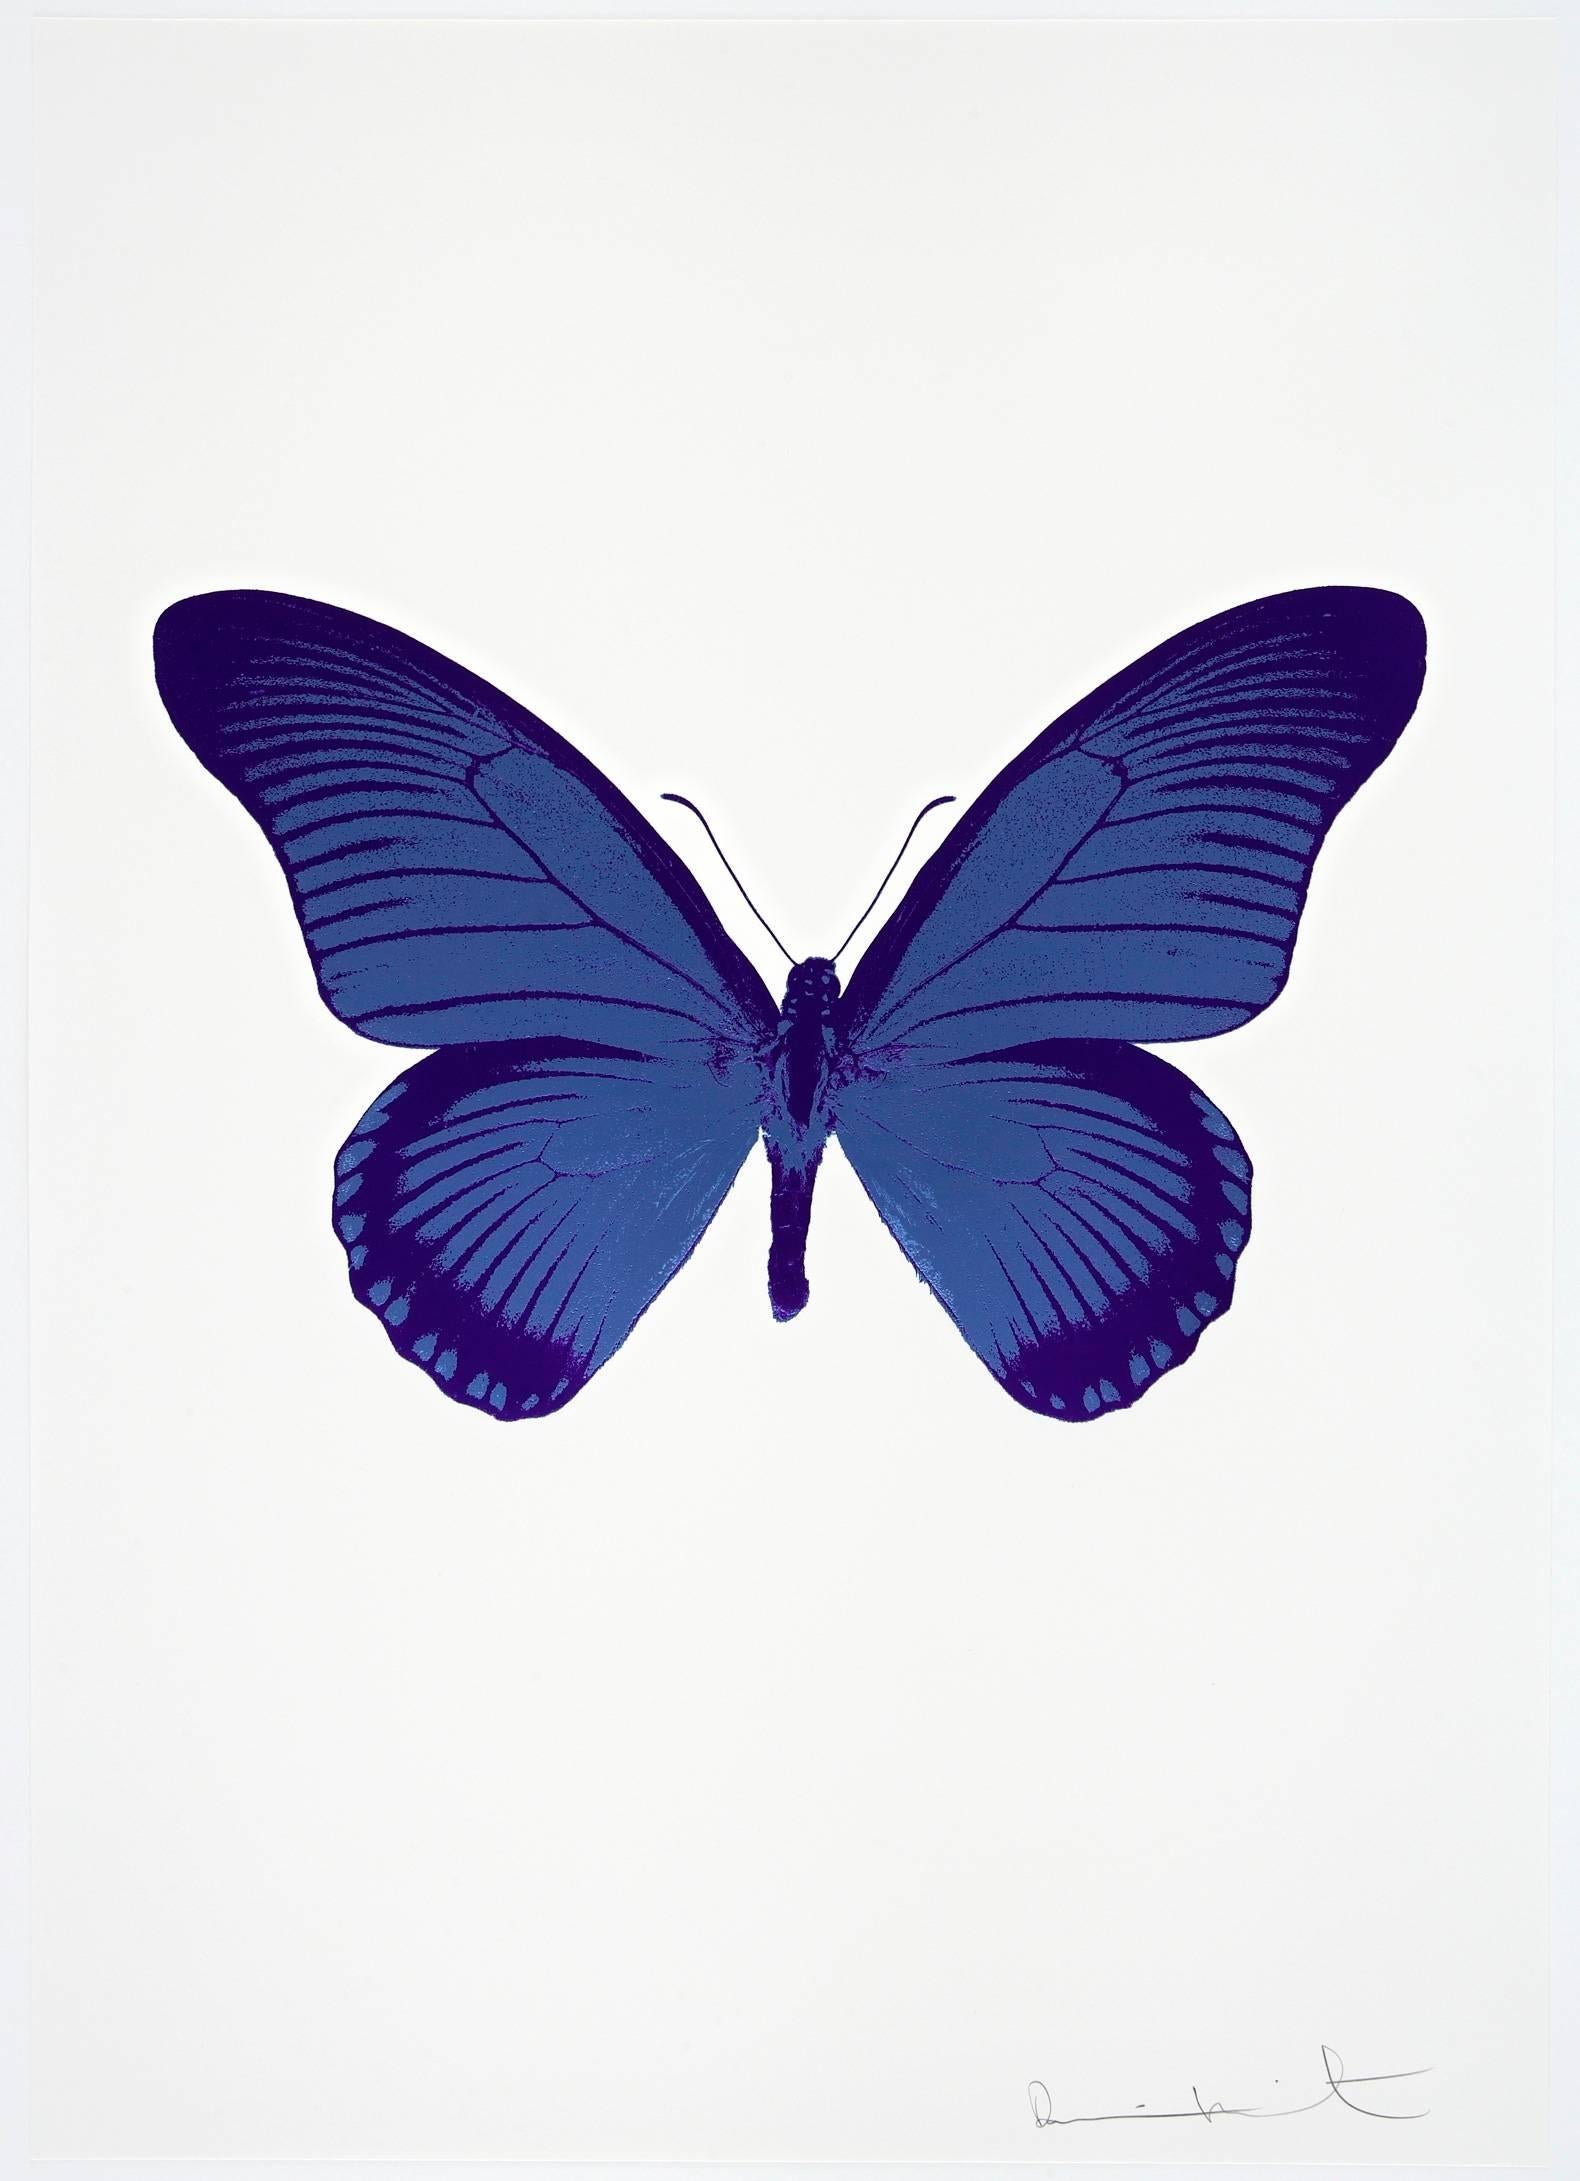 Damien Hirst Animal Print - The Souls IV - Frost Blue/Imperial Purple/Imperial Purple 